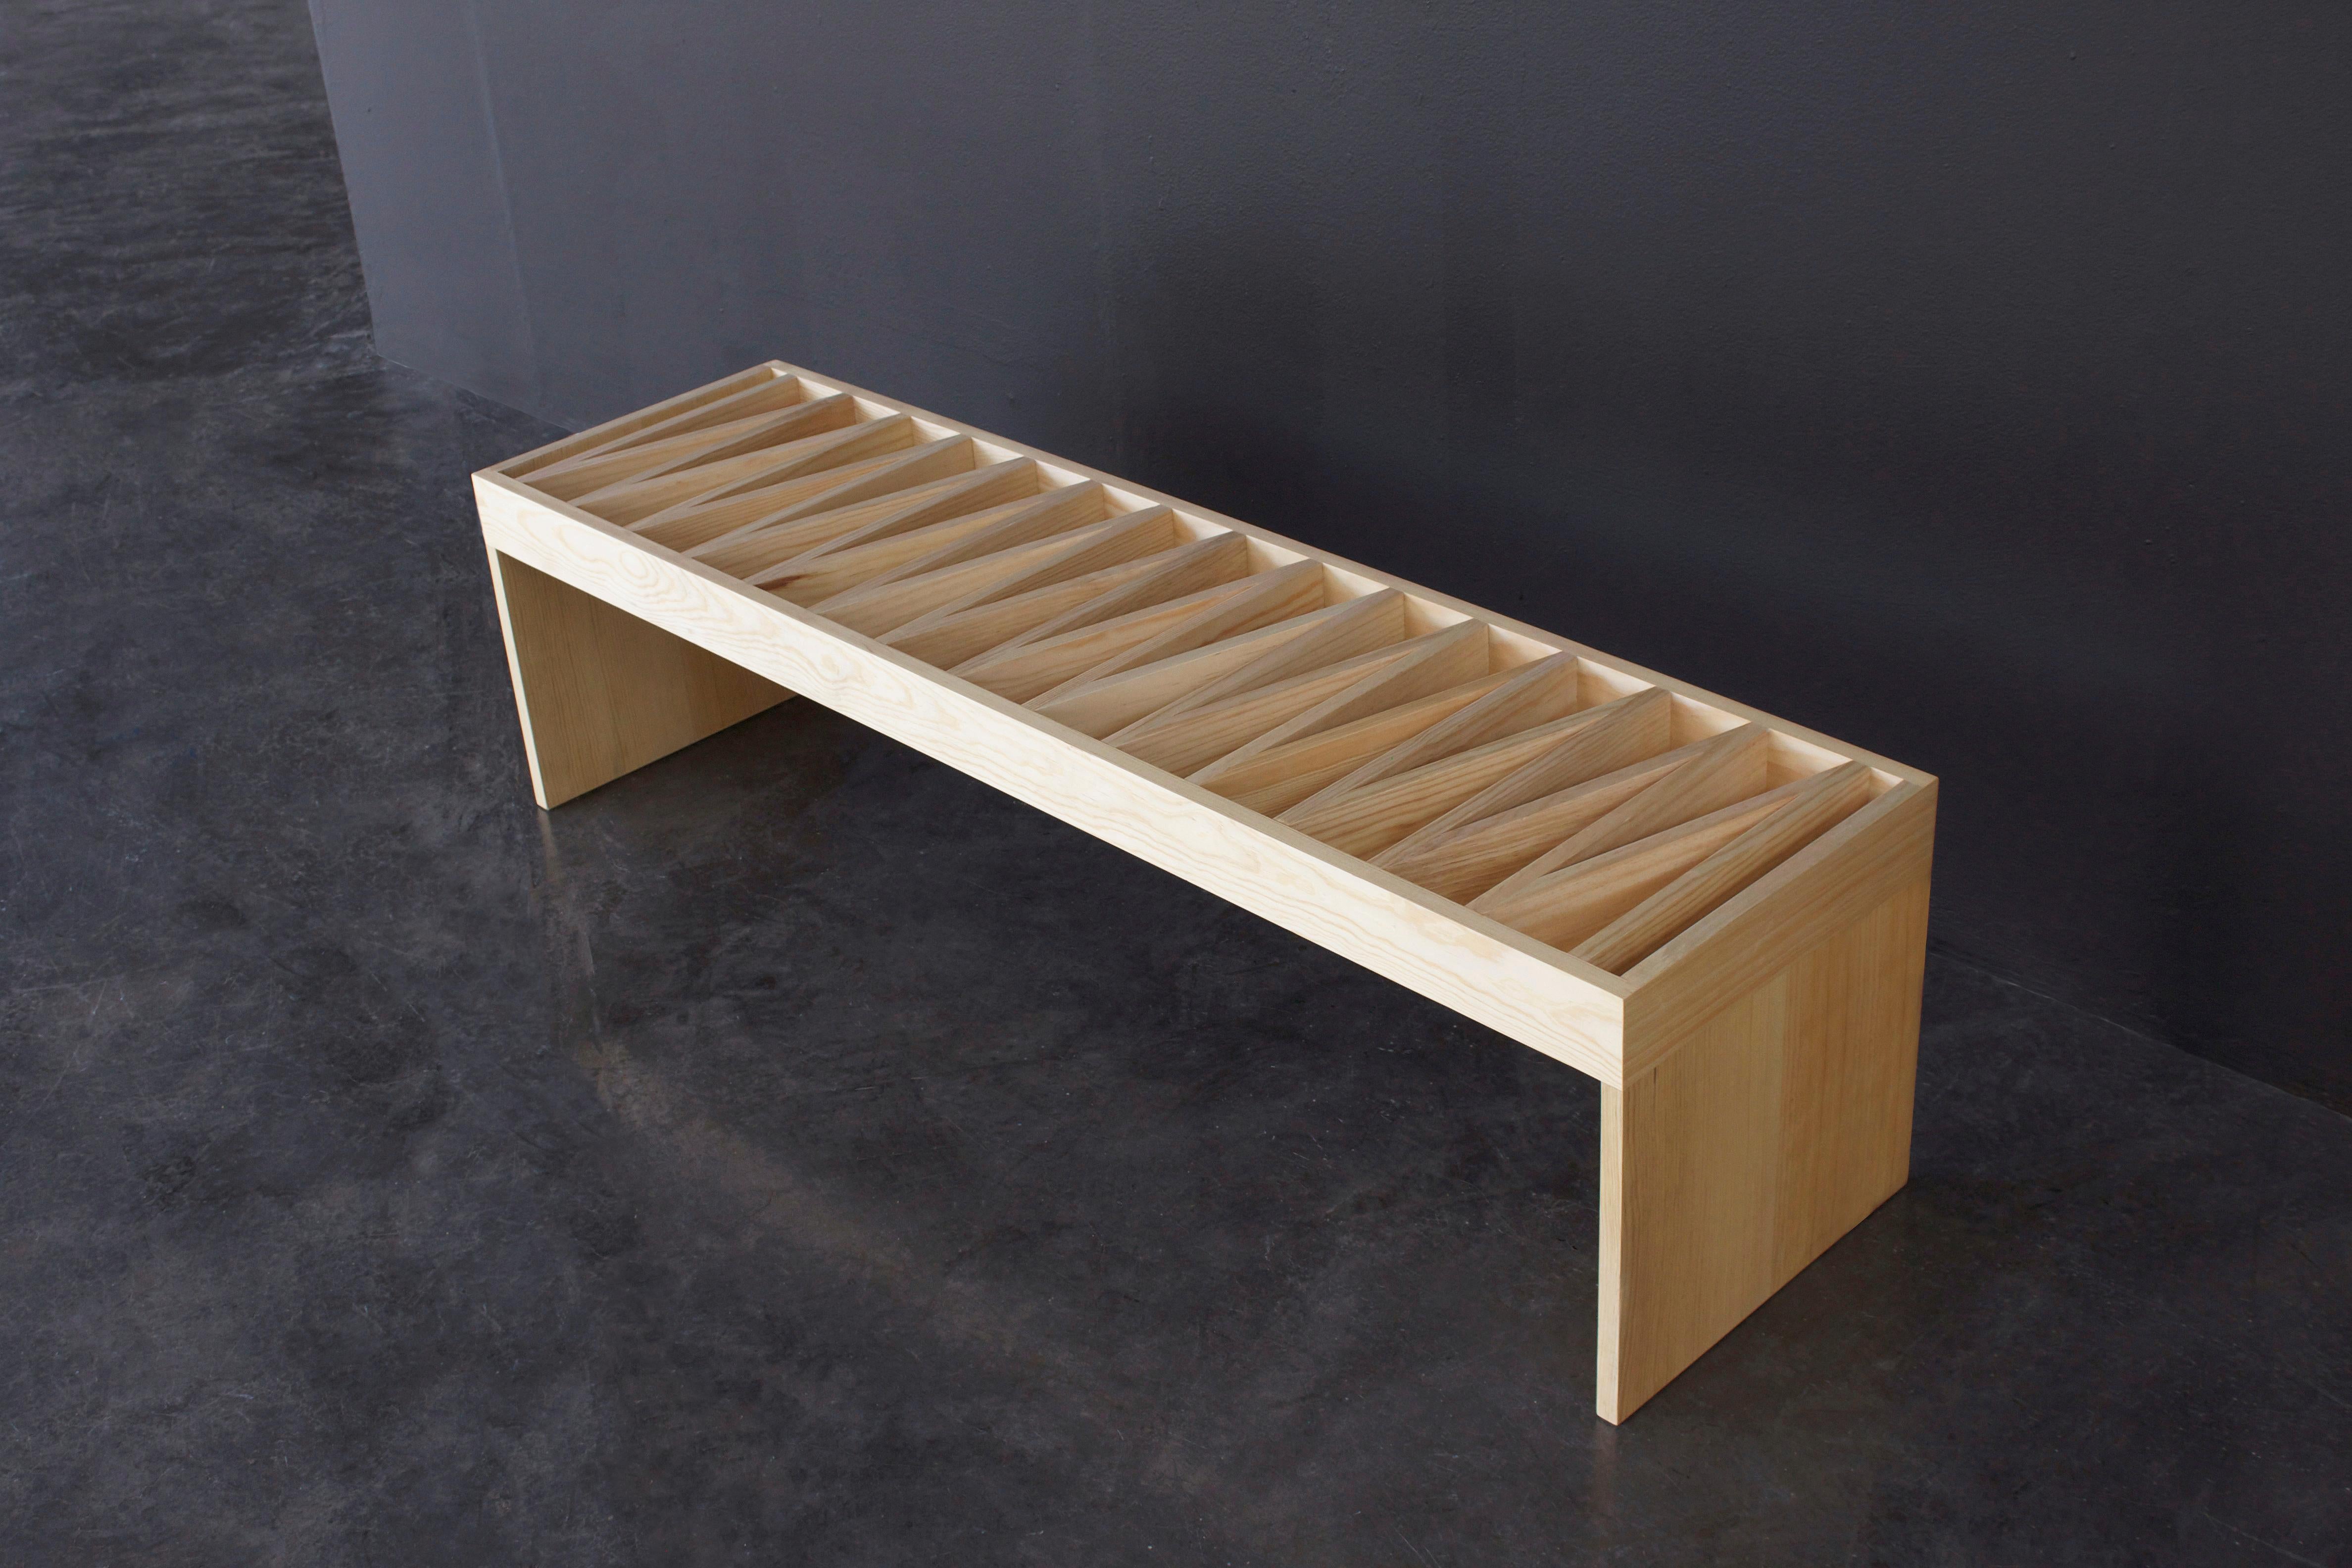 Contemporary bench design by Maria Beckmann. 

Banca Mia is available in multiple materials:
Types of wood: Walnut / Tzalam / Parota / Oak and Ash
Types of finishes: Resistant Matte Varnish & Transparent Oil

The lead time for this item is 4-8